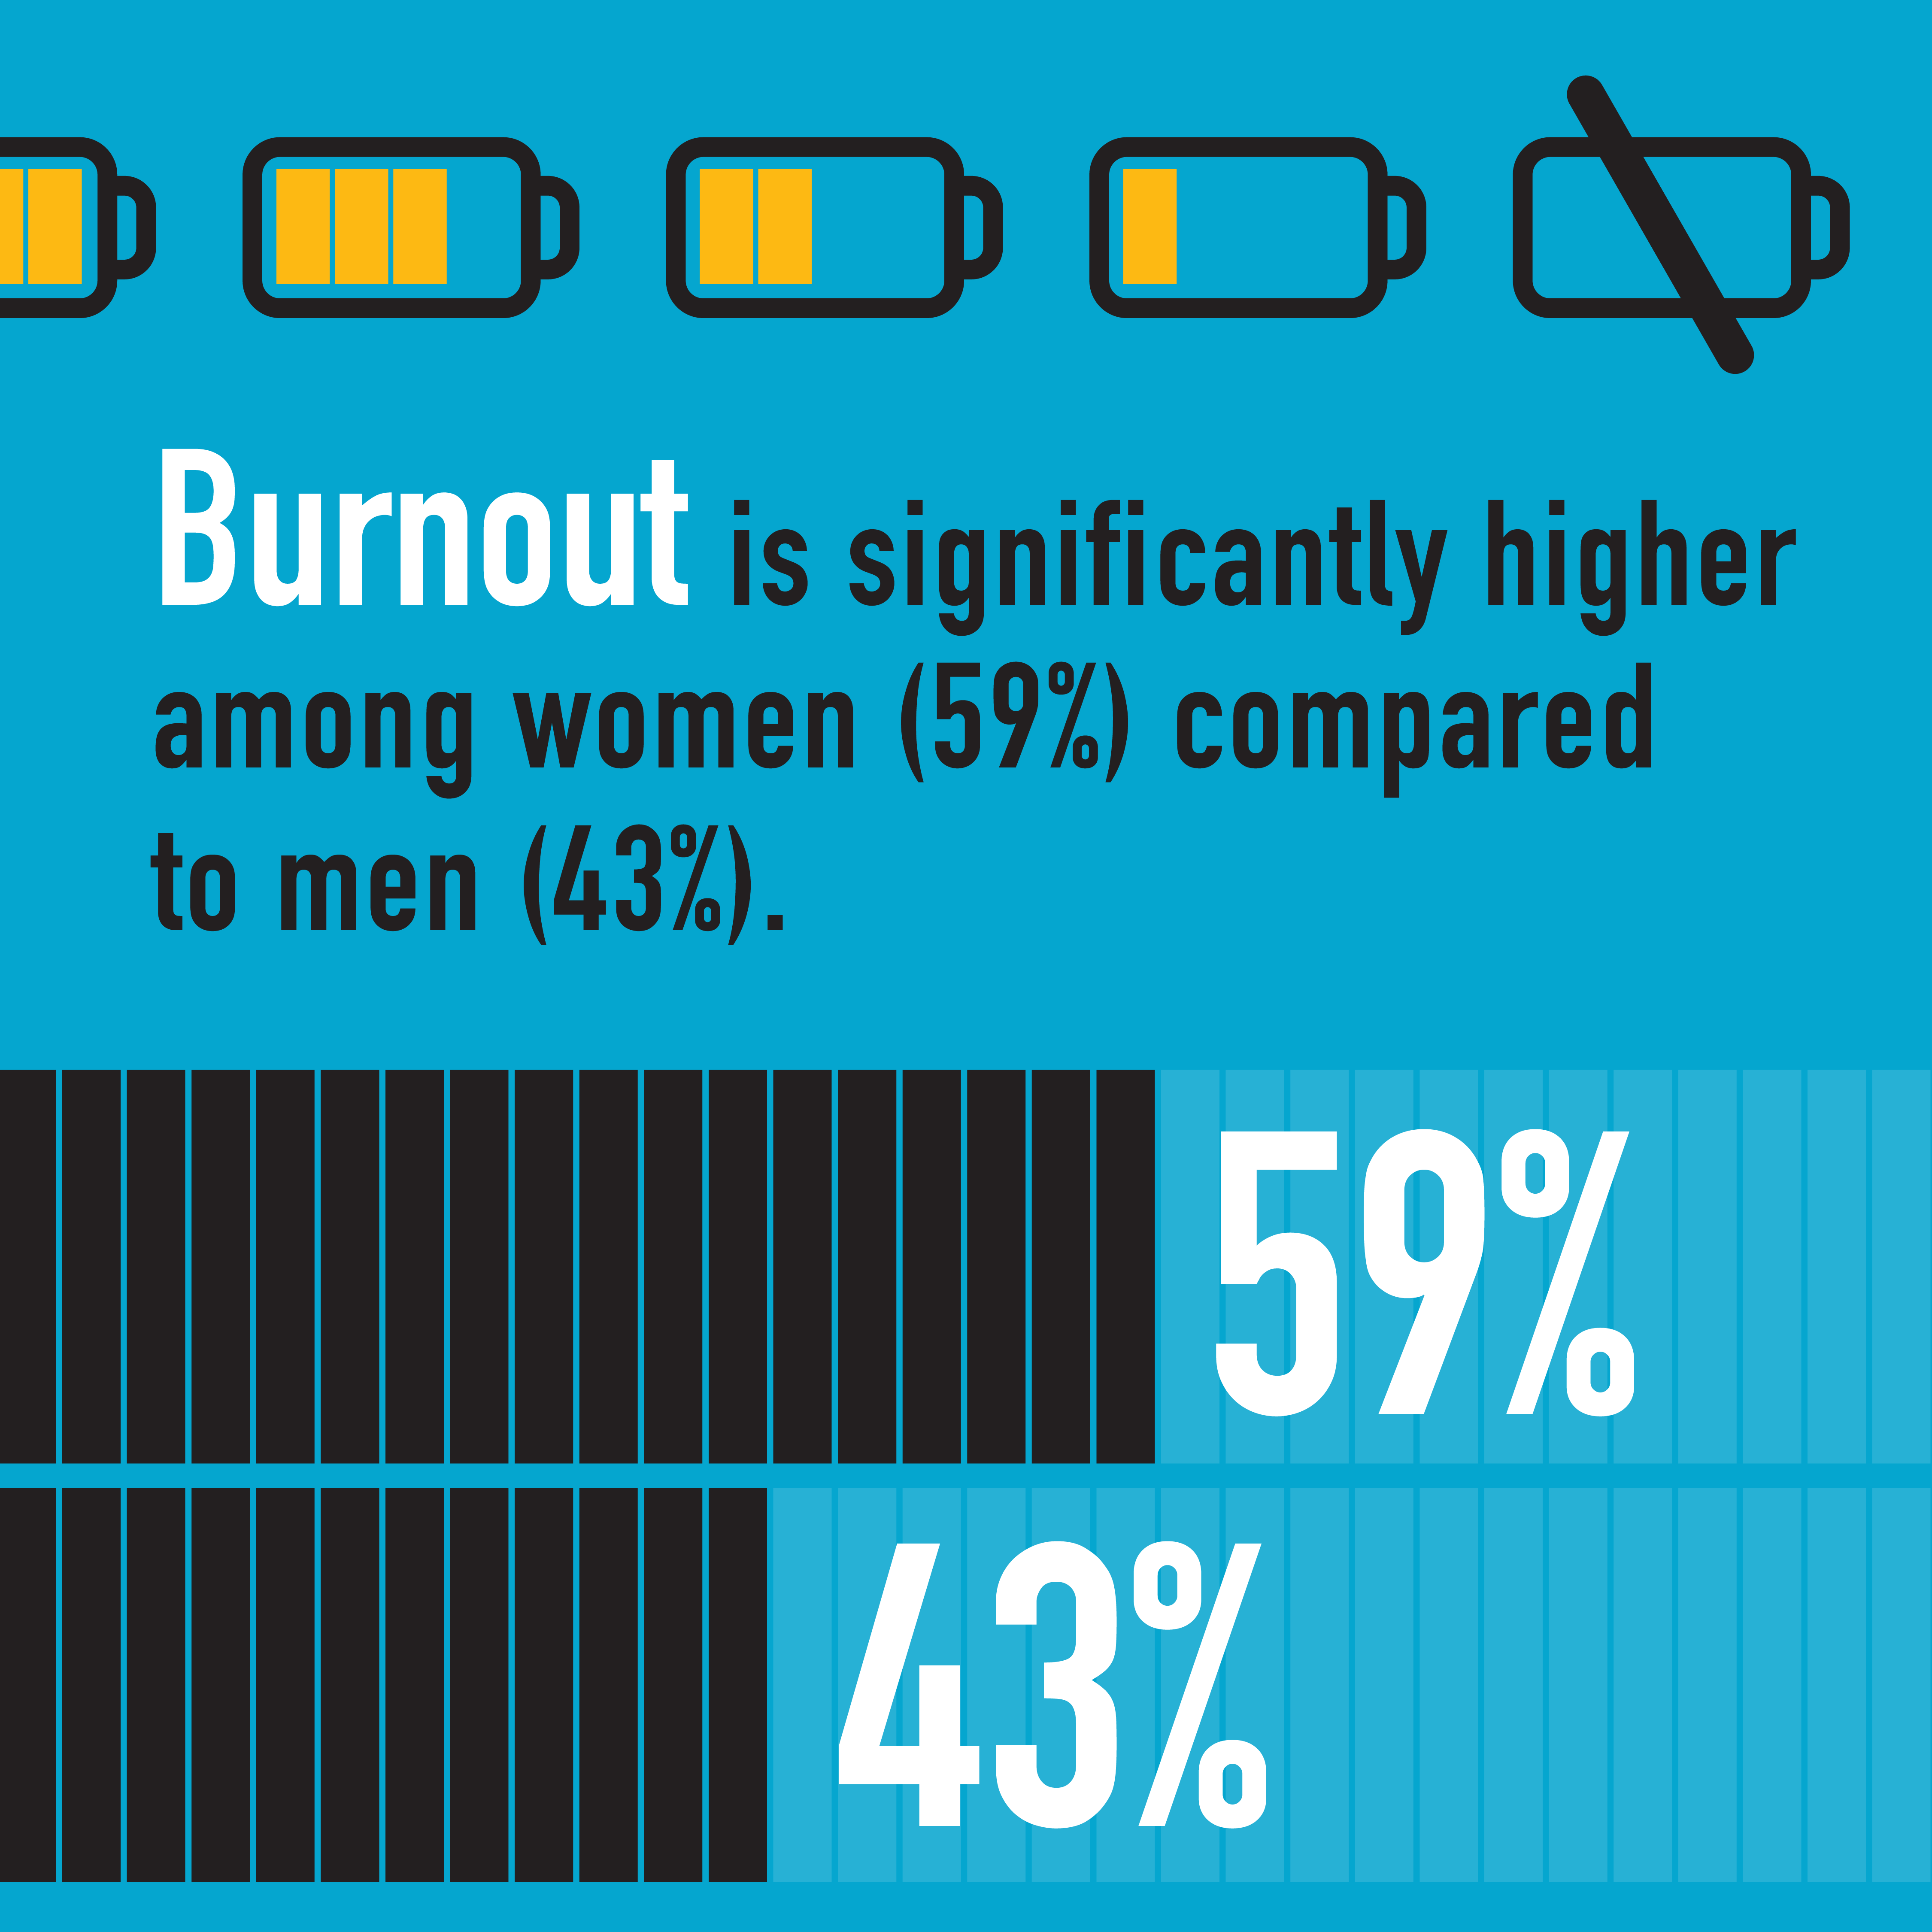 Burnout is significantly higher among women (59%) compared to men (43%)